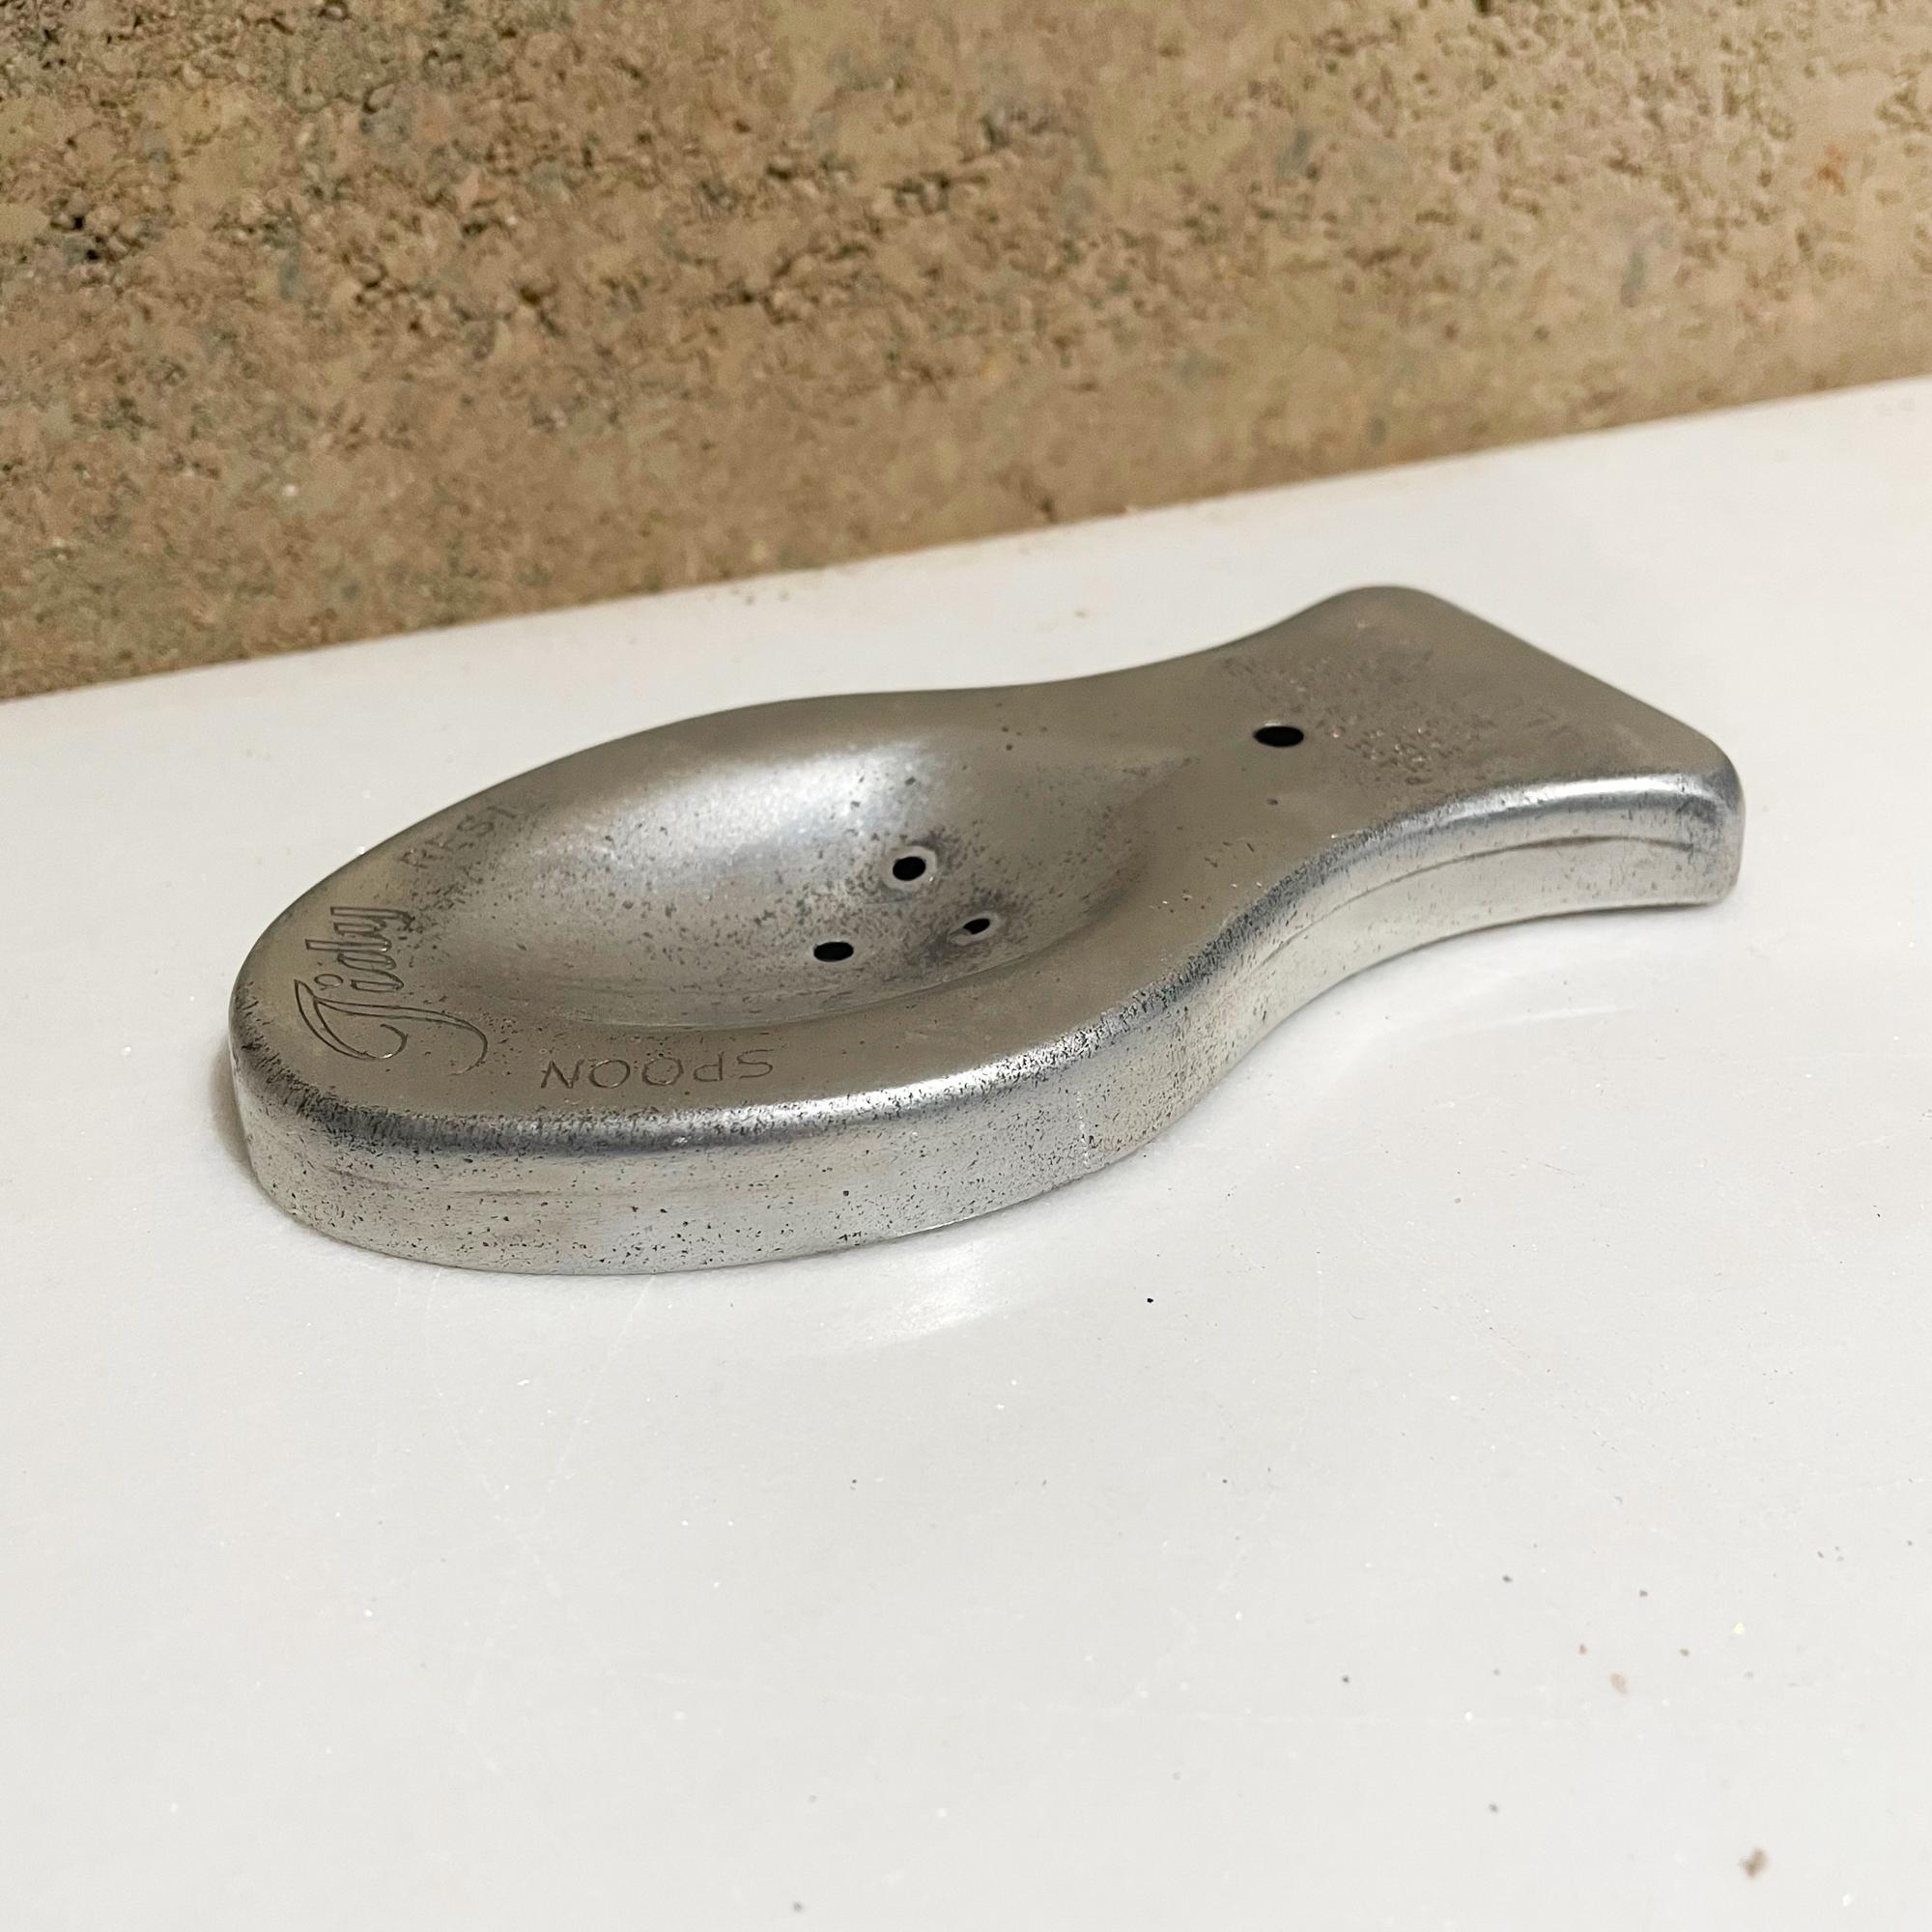 American Vintage Tidy Spoon Rest Unbreakable Aluminum 1950s Modern Kitchen Classic